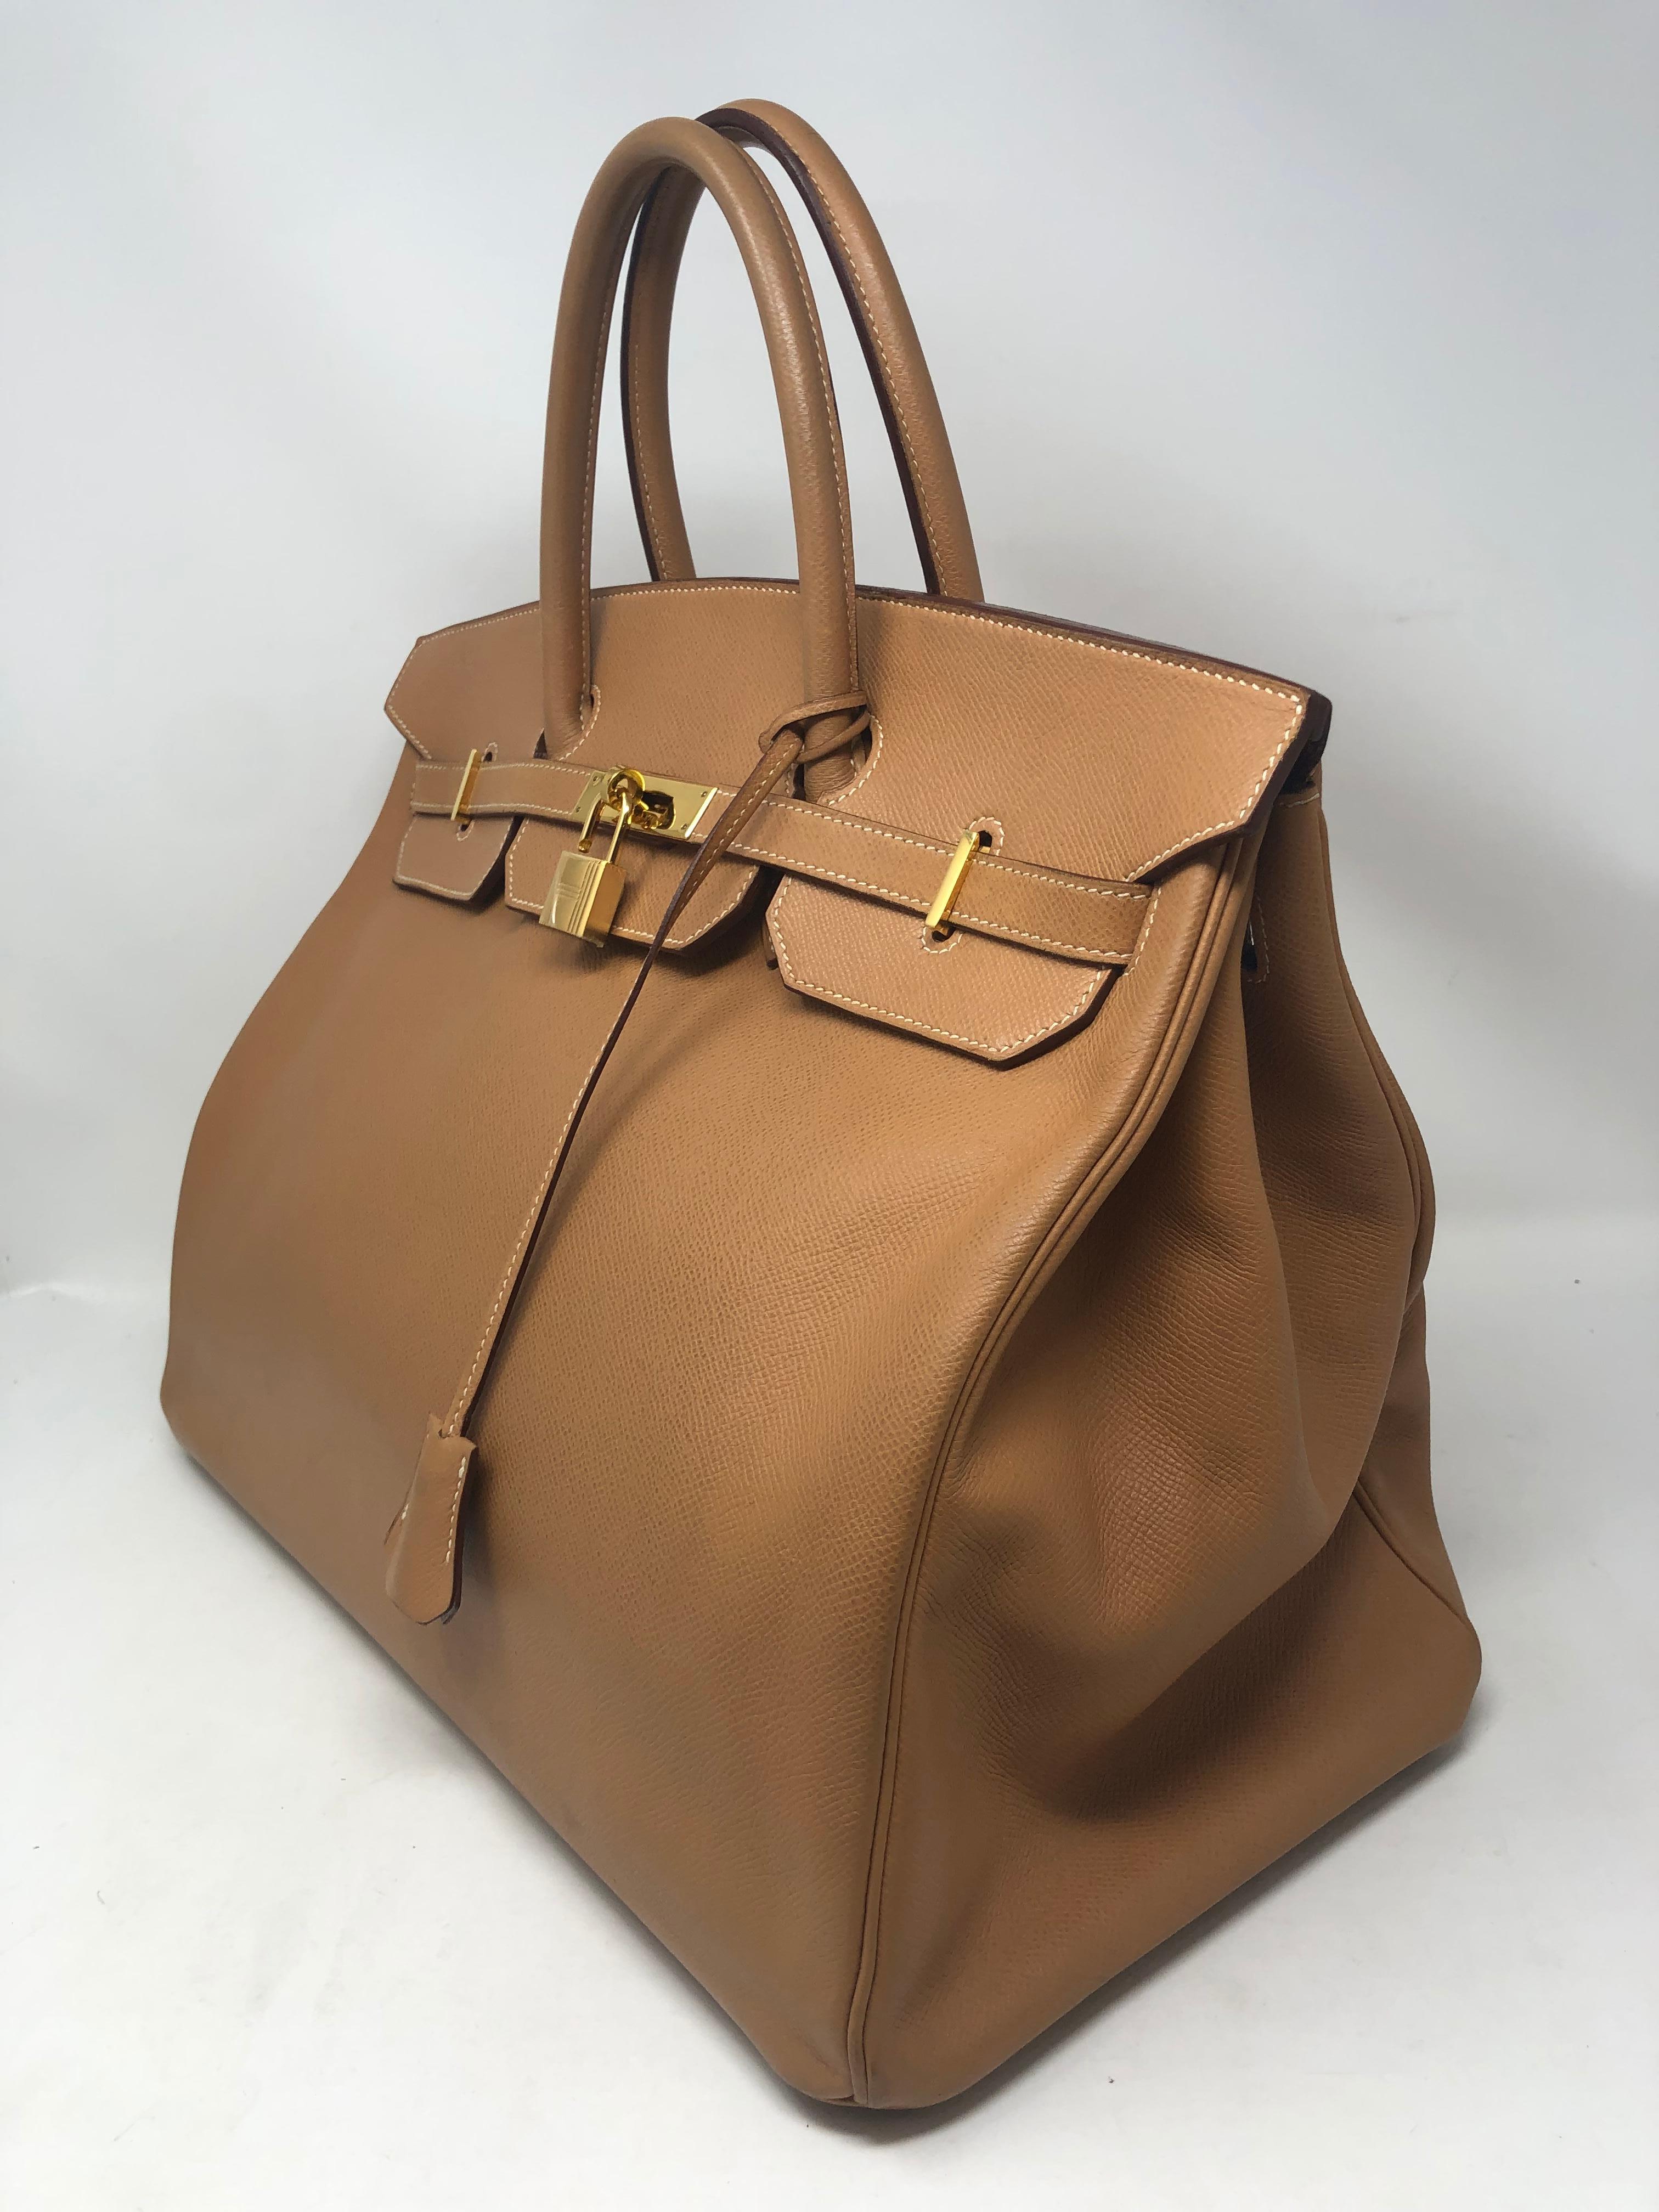 Hermes Birkin Tan Color with gold hardware. Rare size 40. Vintage Birkin in light gold tan color. Good condition. Light scuffs on corner. Beautiful leather and interior clean. No longer produced size 40. Can be a great luggage companion or every day